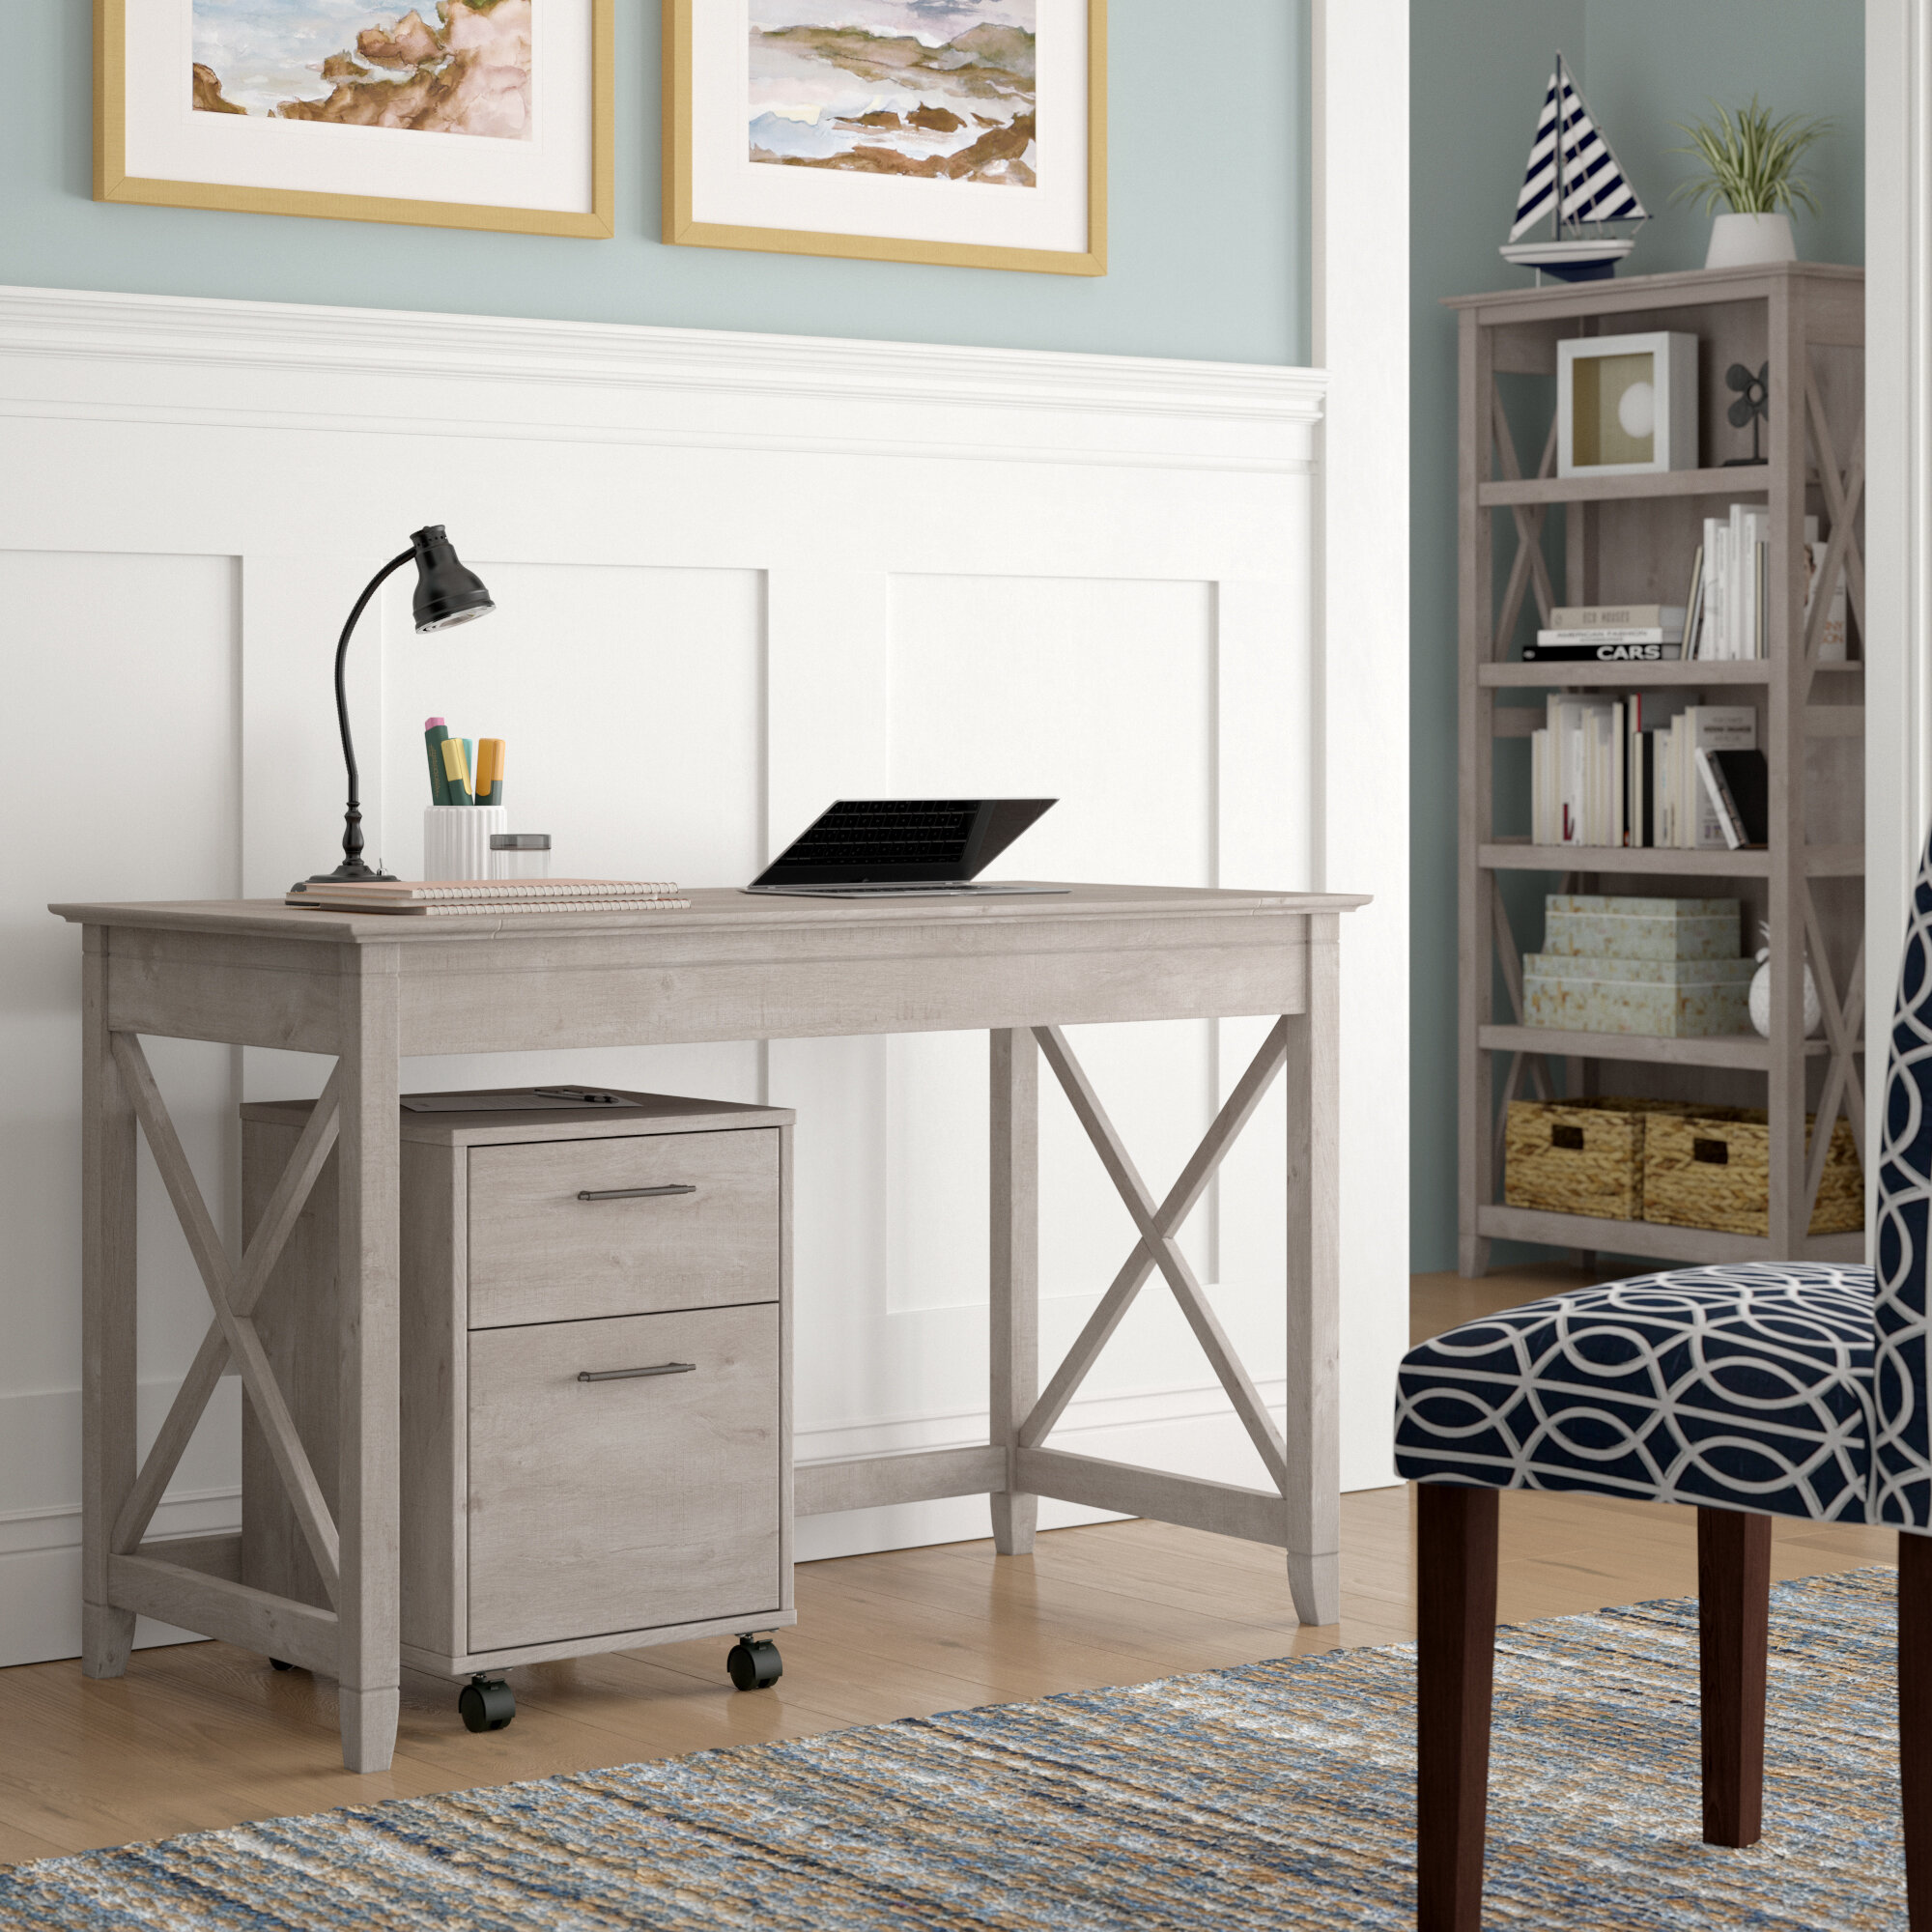 Beachcrest Home Cyra Desk Bookcase And Filing Cabinet Set